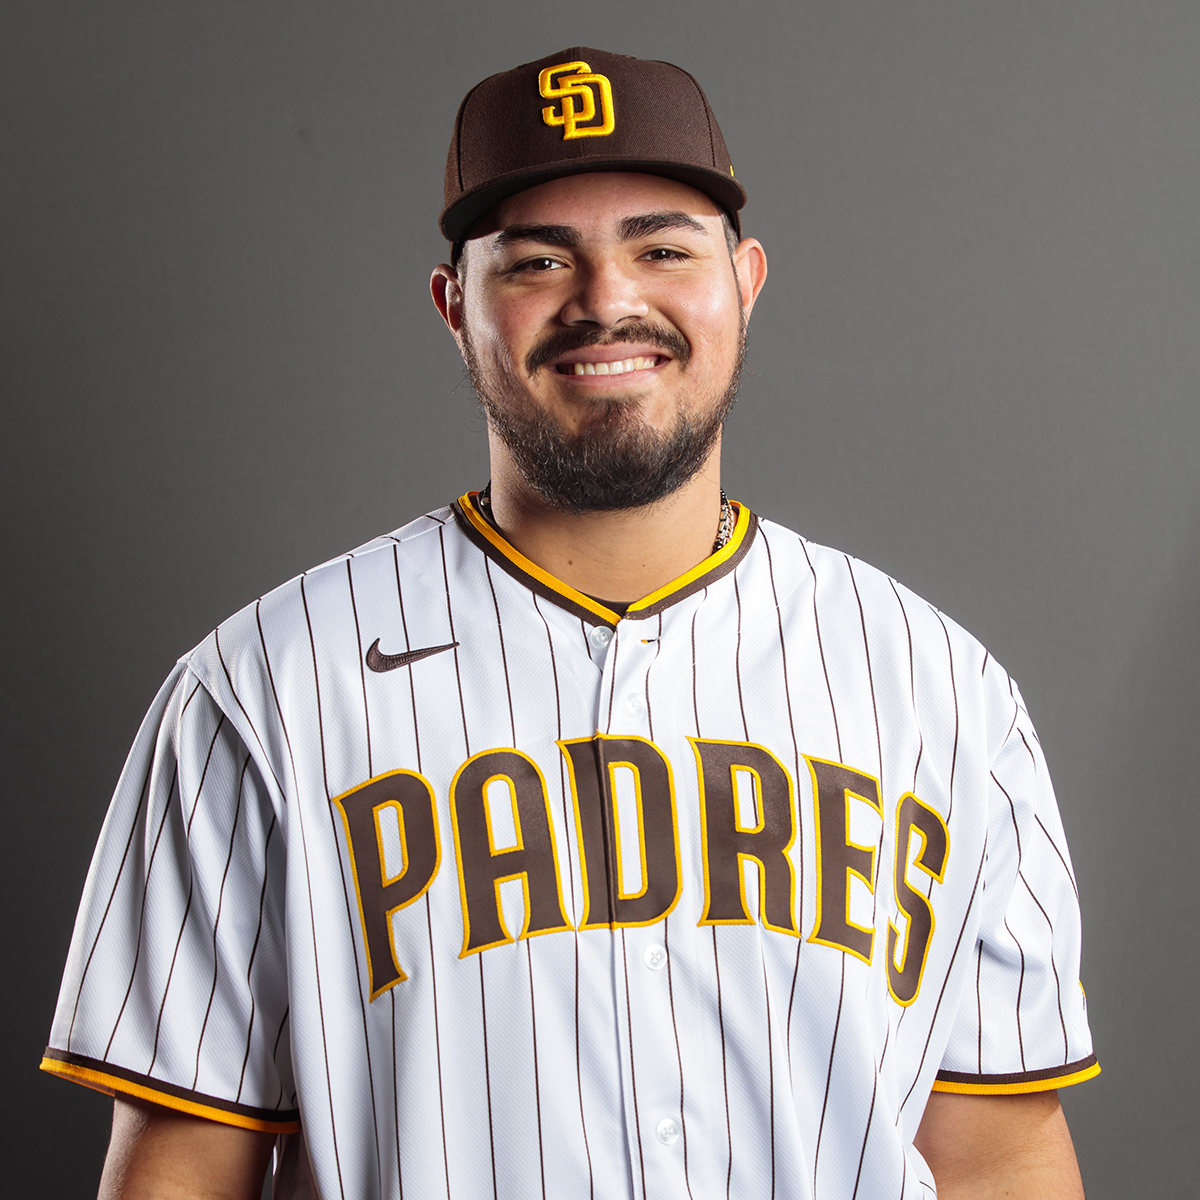 San Diego Padres' Minors Roster Projections: El Paso Chihuahuas